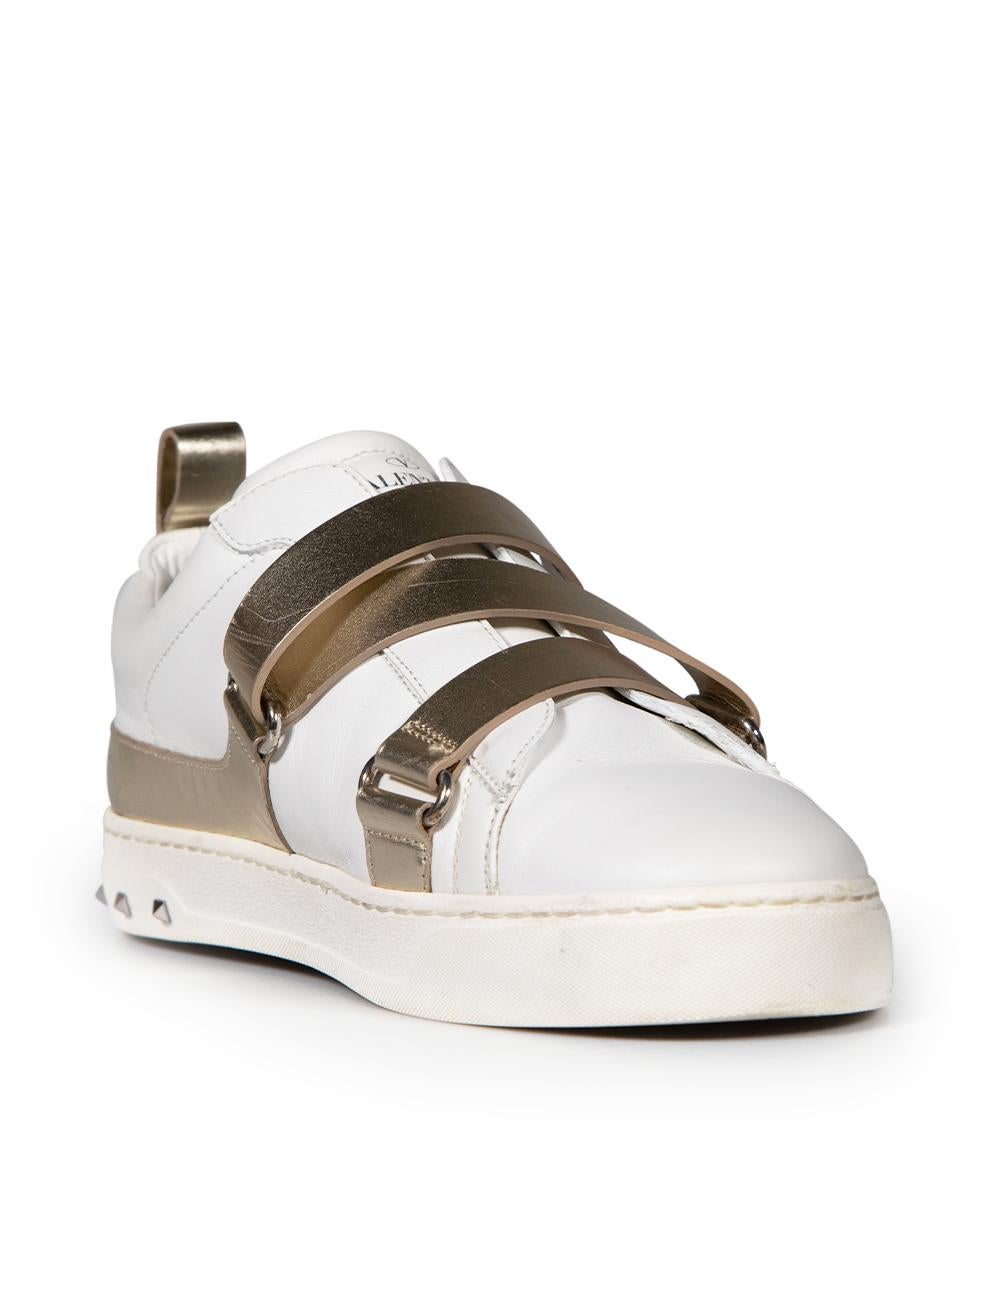 Valentino White Leather Gold Buckle Trainers Size IT 38.5 In Good Condition For Sale In London, GB